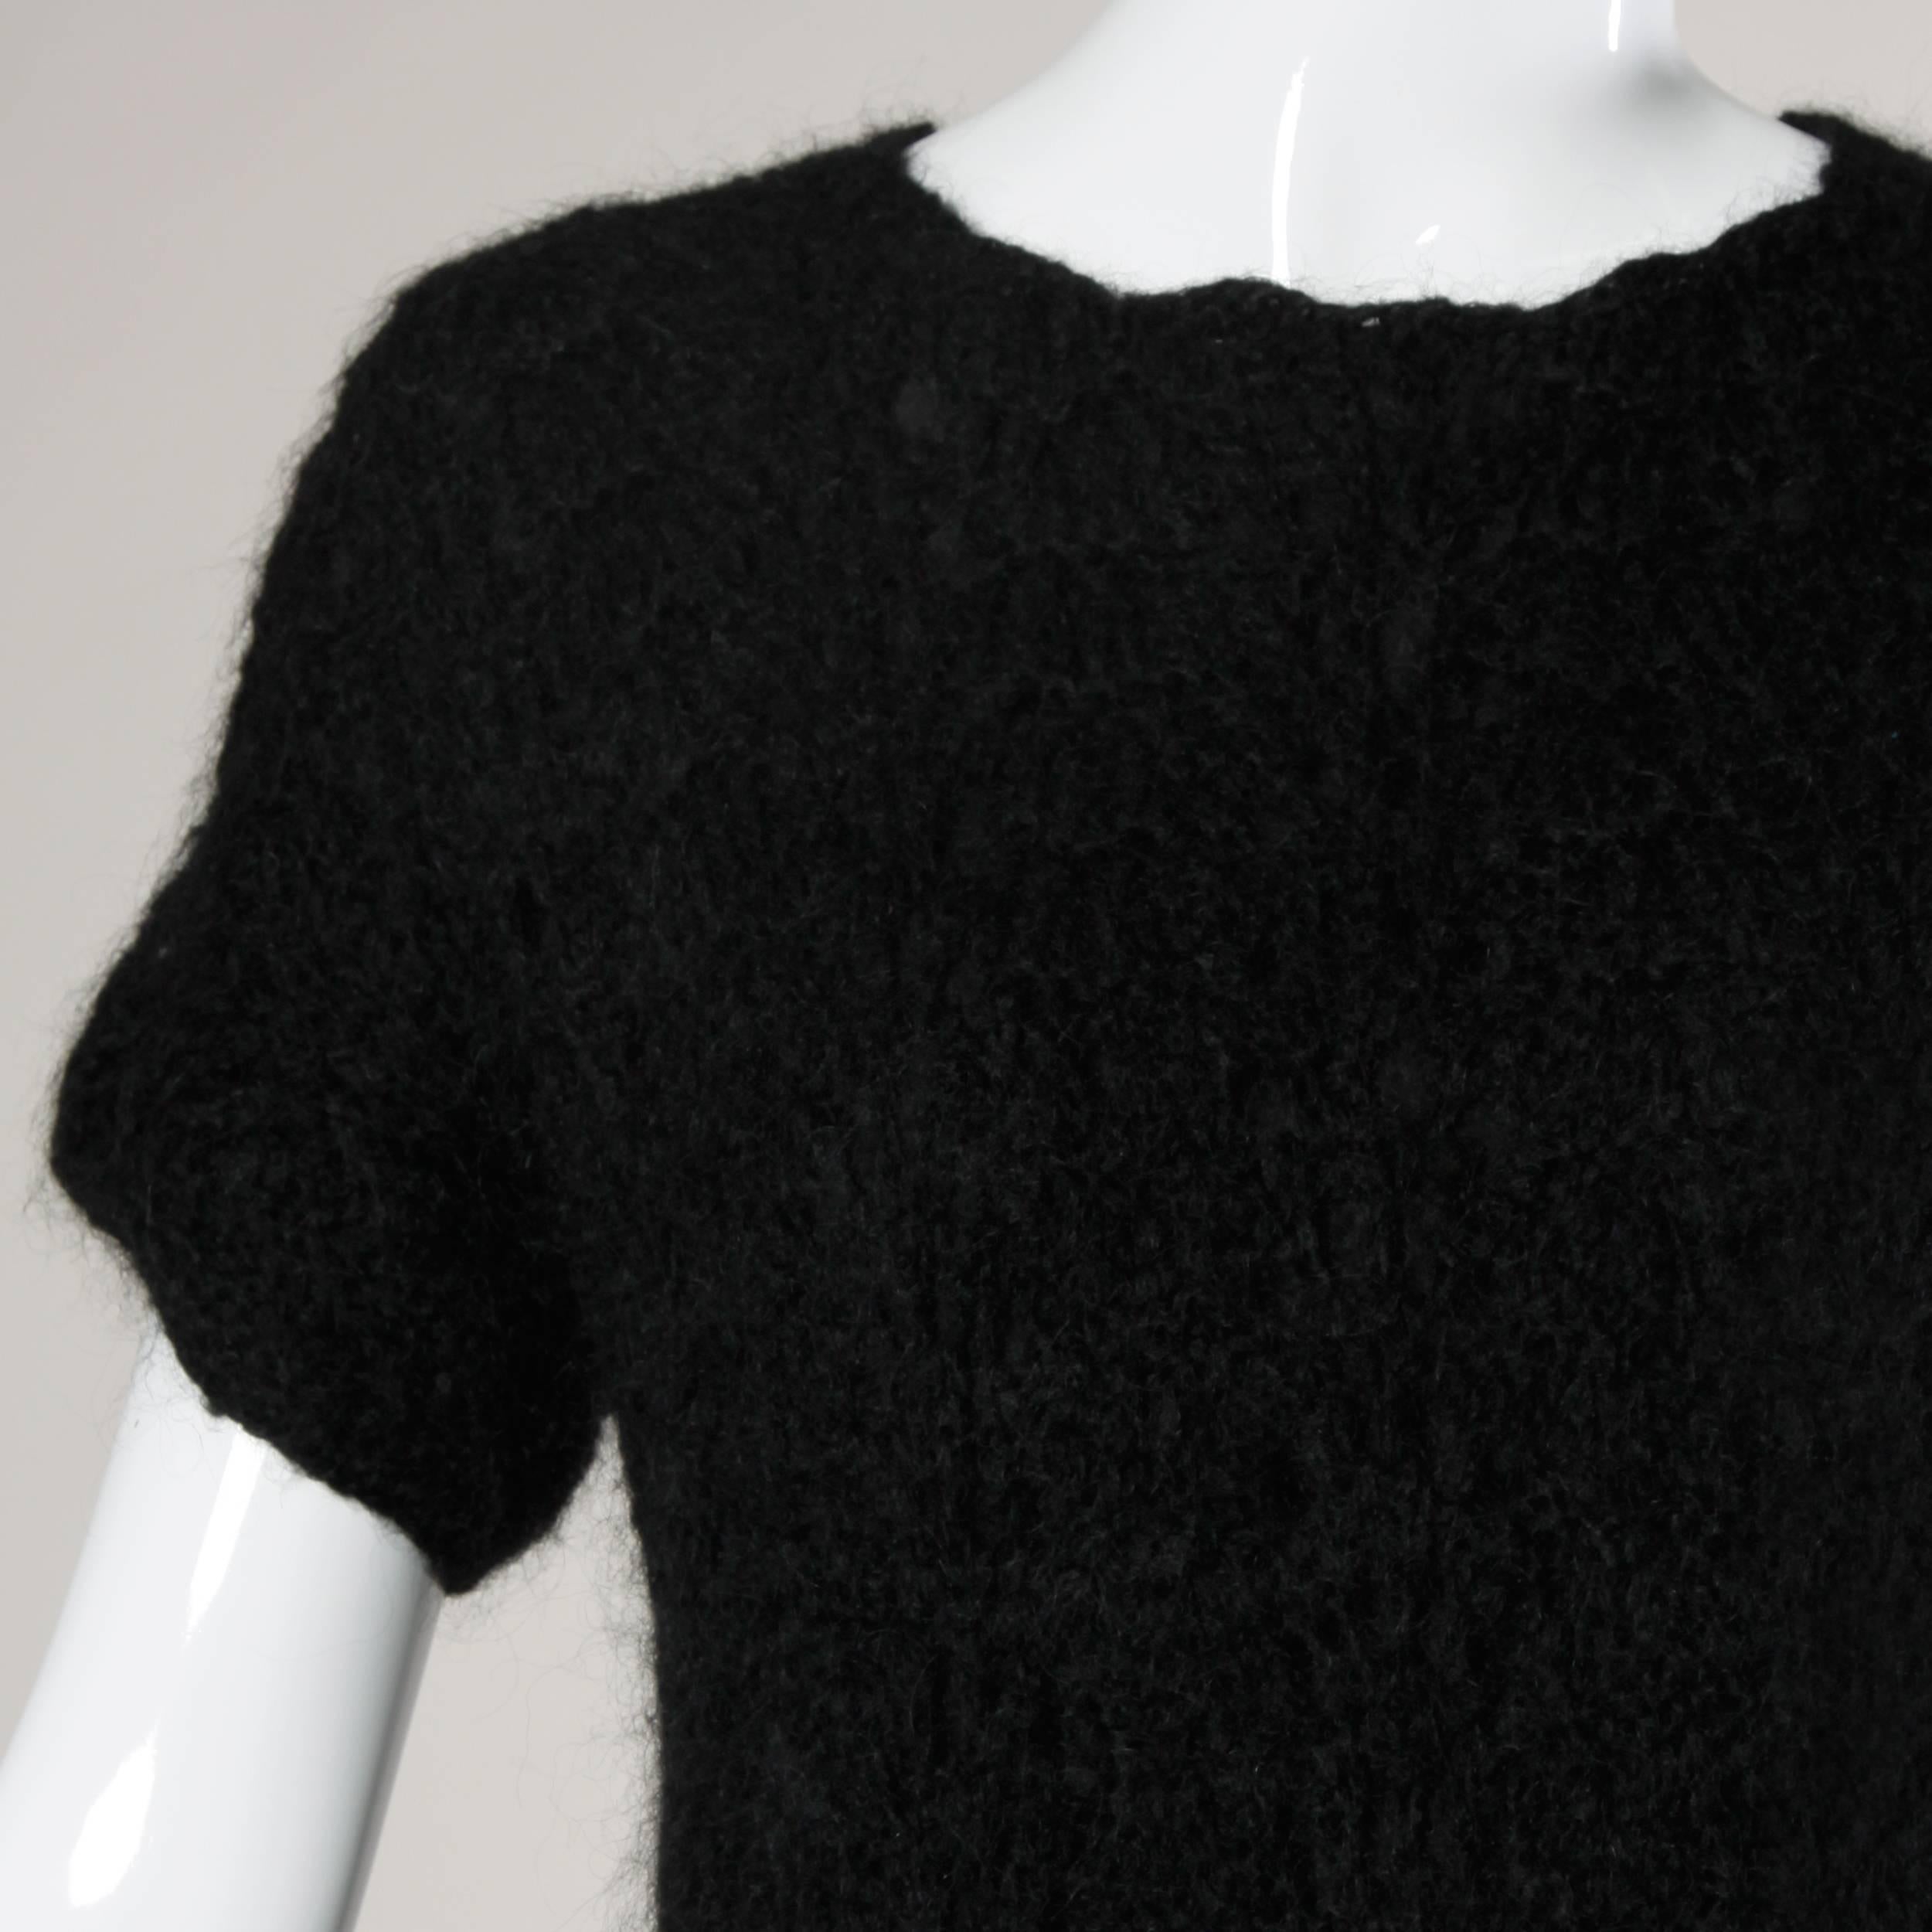 Hand crocheted Italian wool dress by Macy Associates.

Details:

Fully Lined
No Closure/ Fabric Contains Stretch
Marked Size: 12
Estimated Size: M
Color: Black
Fabric: Not Marked
Label: Macy Associates

Measurements:

Shoulders: